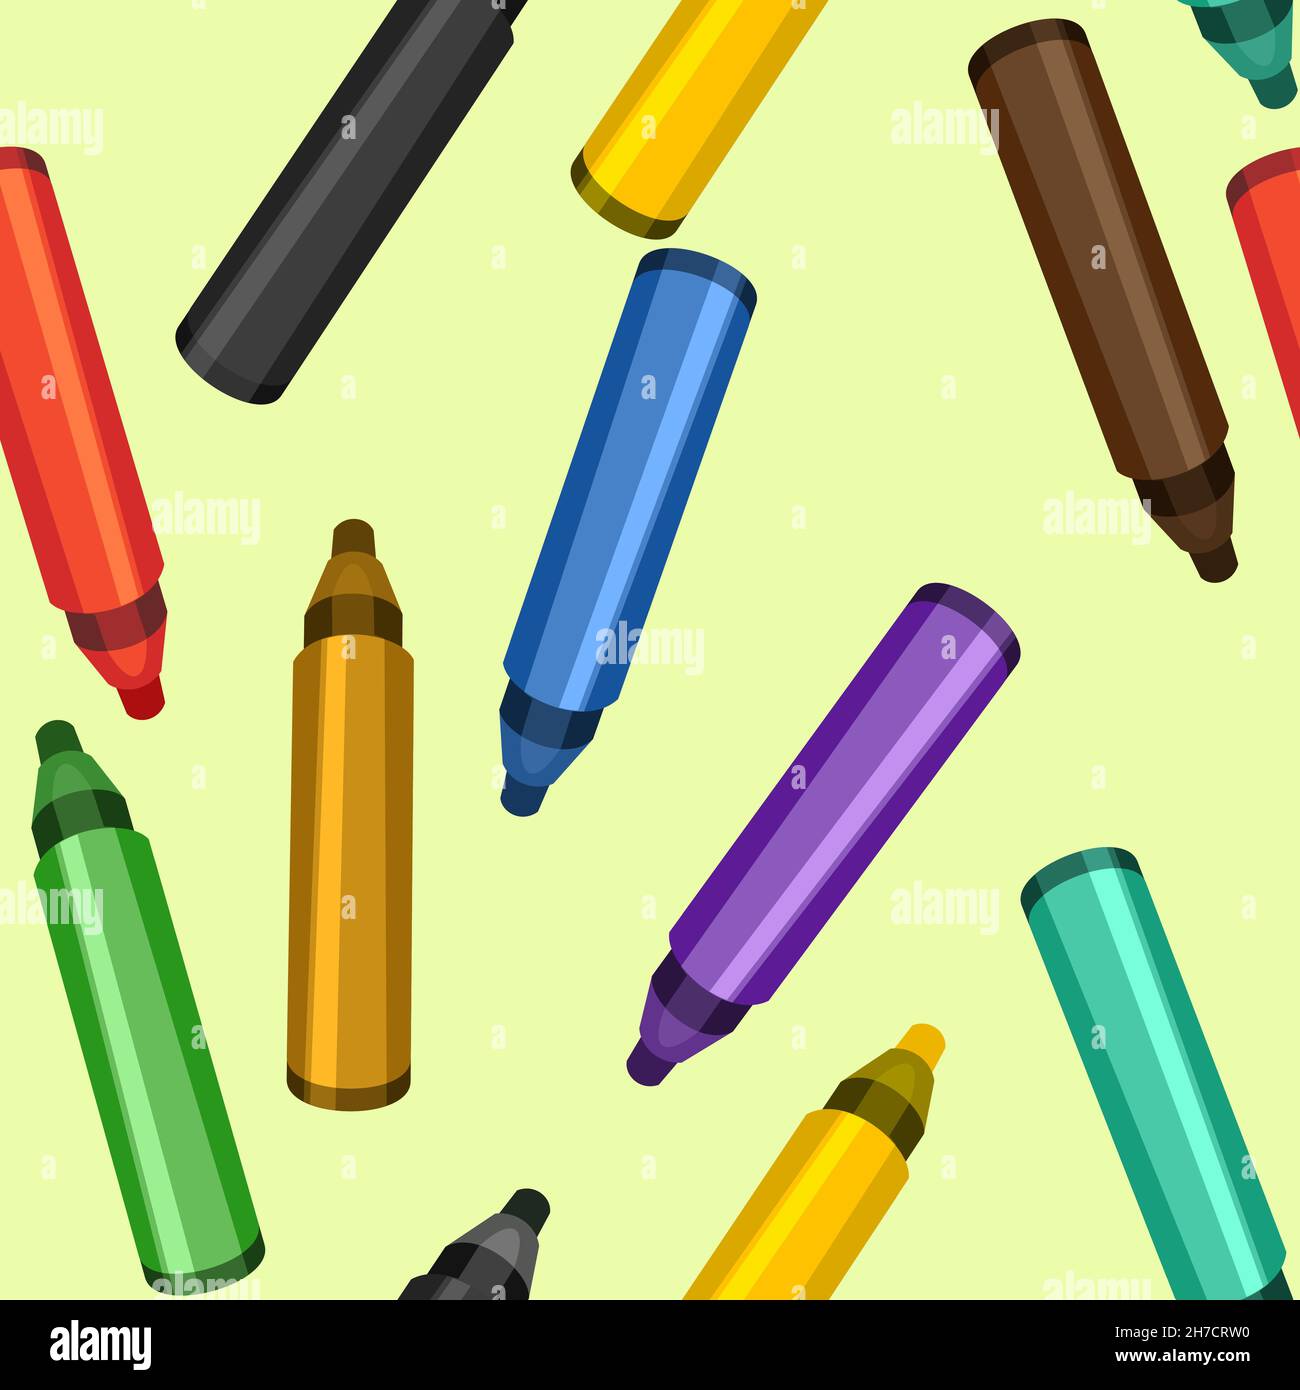 https://c8.alamy.com/comp/2H7CRW0/markers-flat-style-stationery-for-drawing-and-creativity-seamless-background-pattern-vector-2H7CRW0.jpg